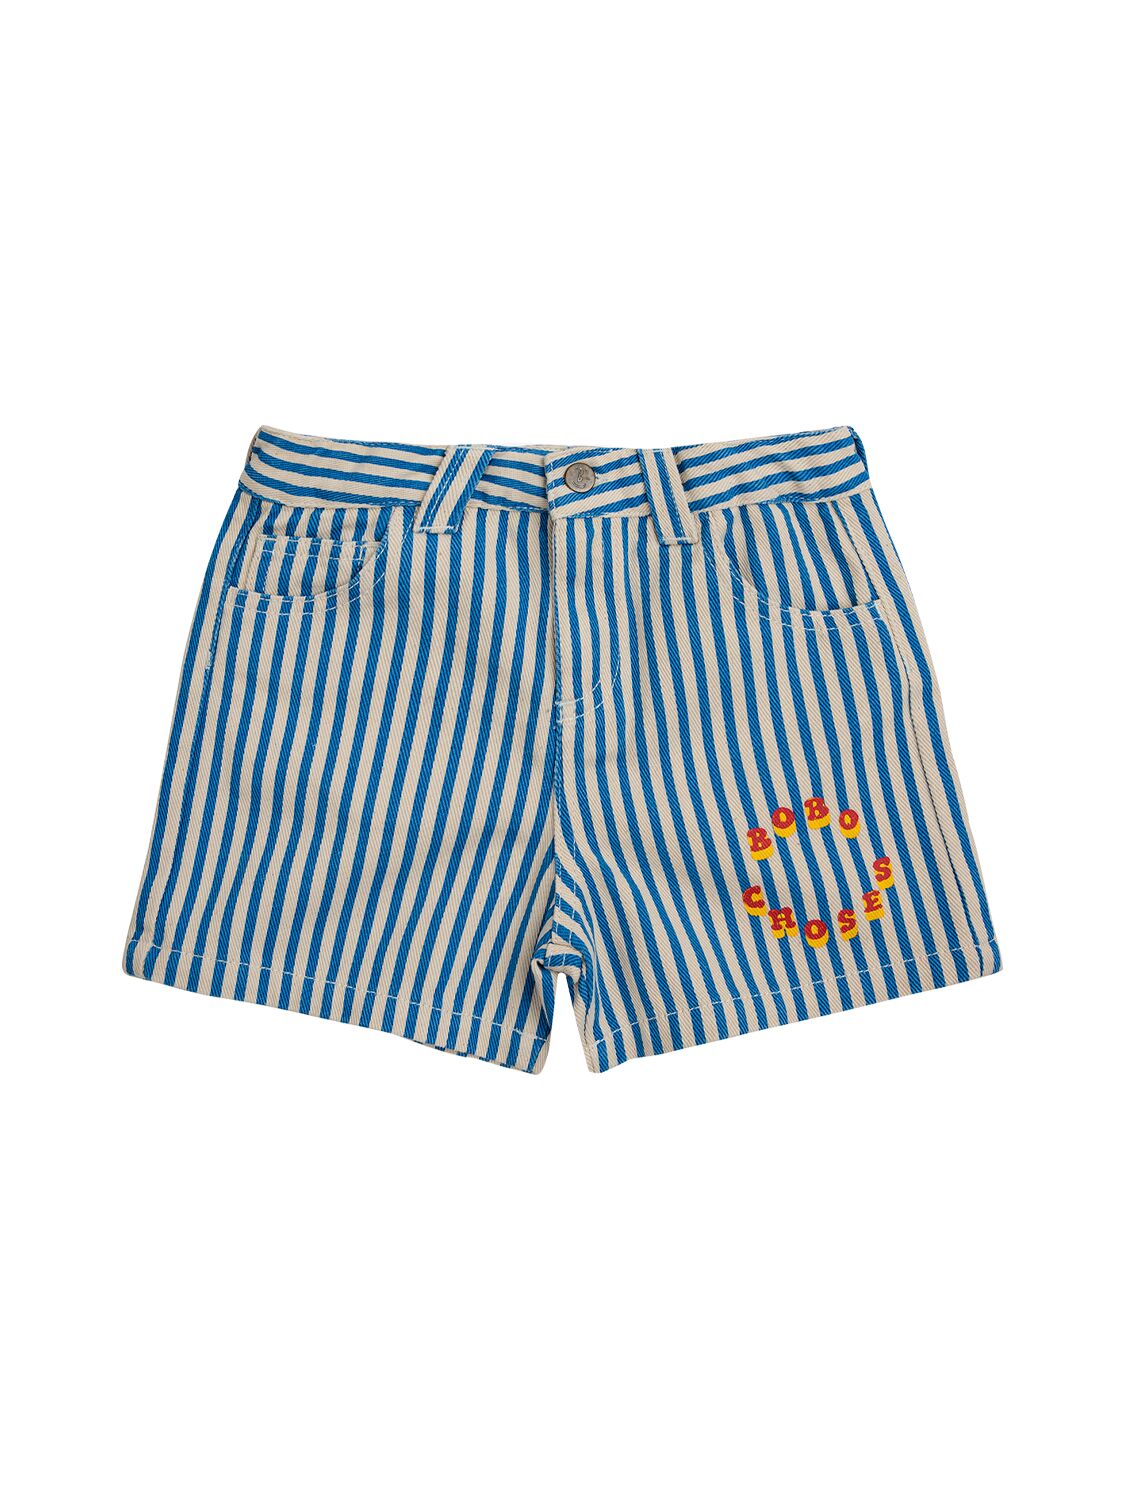 Image of Striped Woven Cotton Shorts